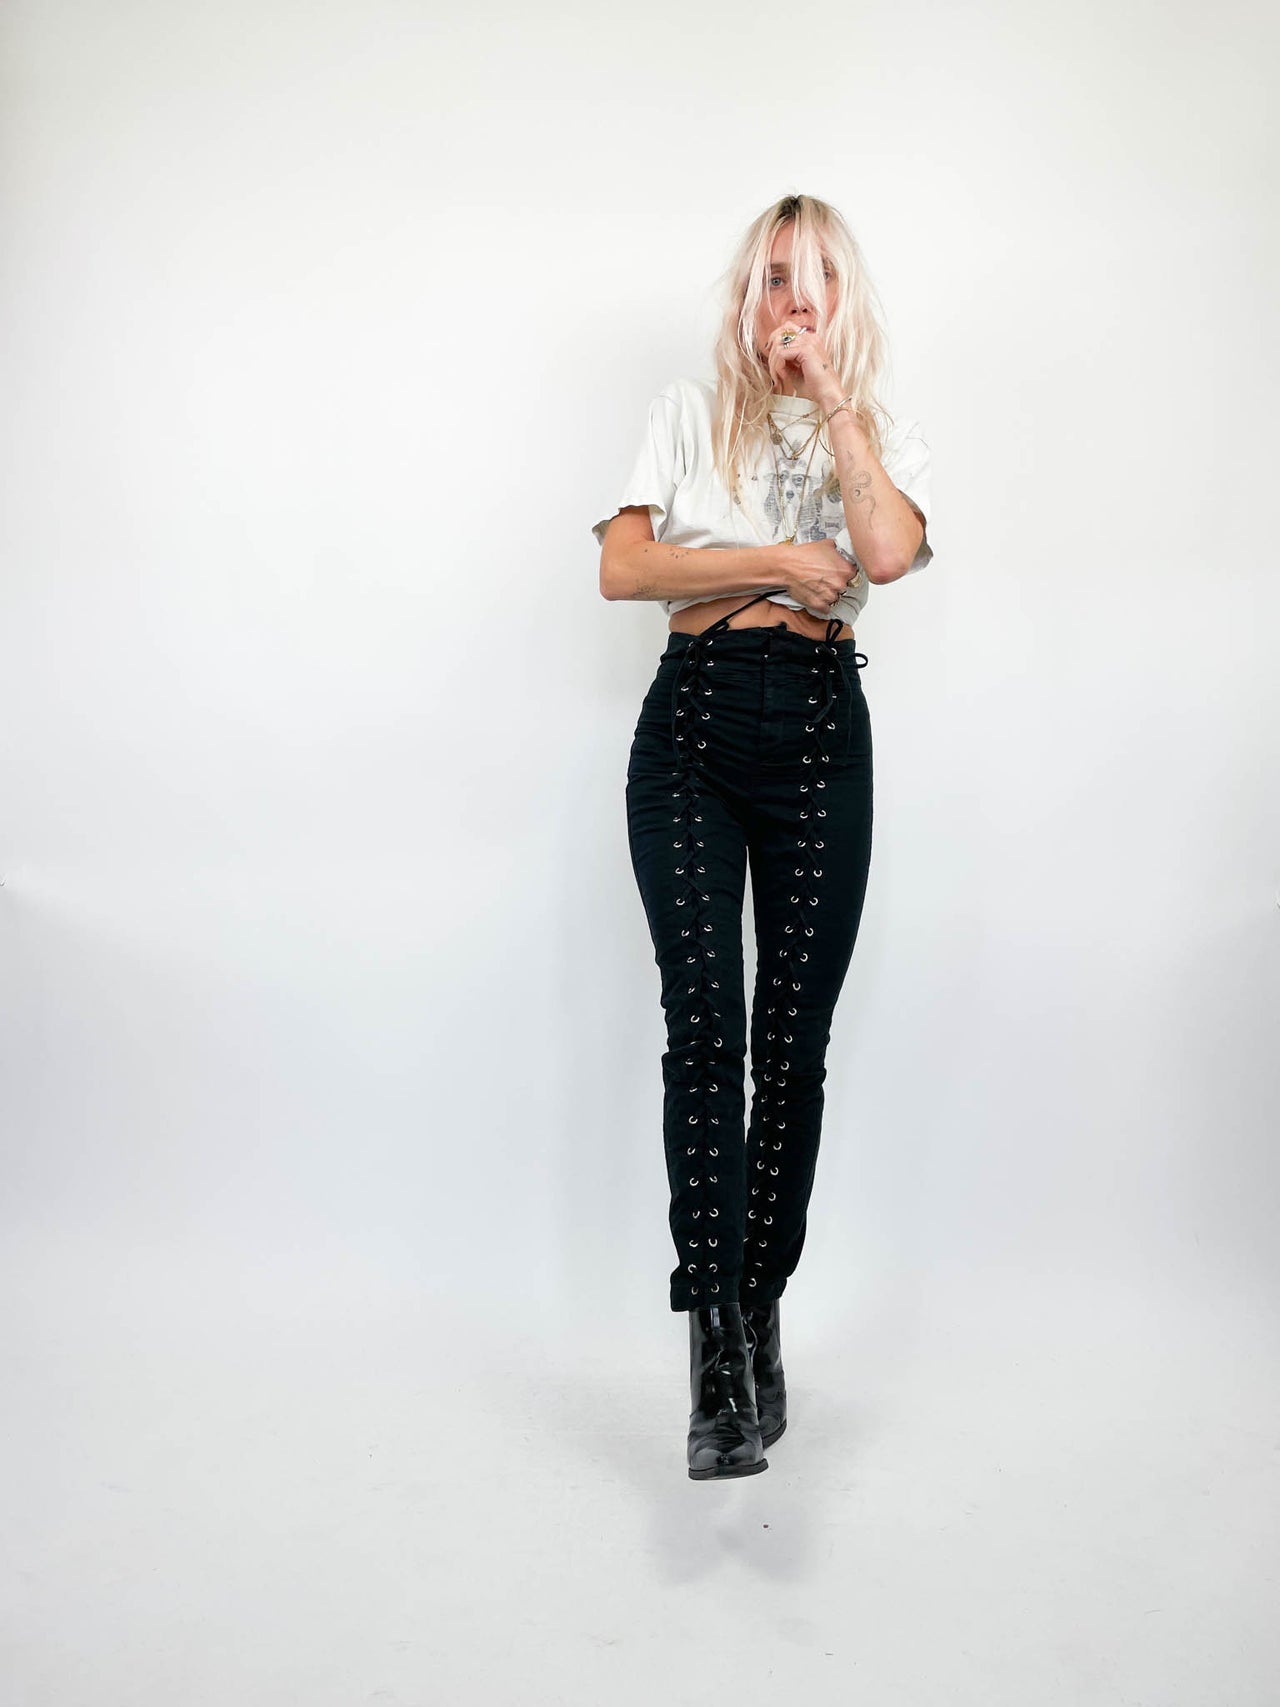 A.L.C Kinsley Lace Up Skinny Black Trousers (XS/S) // RRP £200